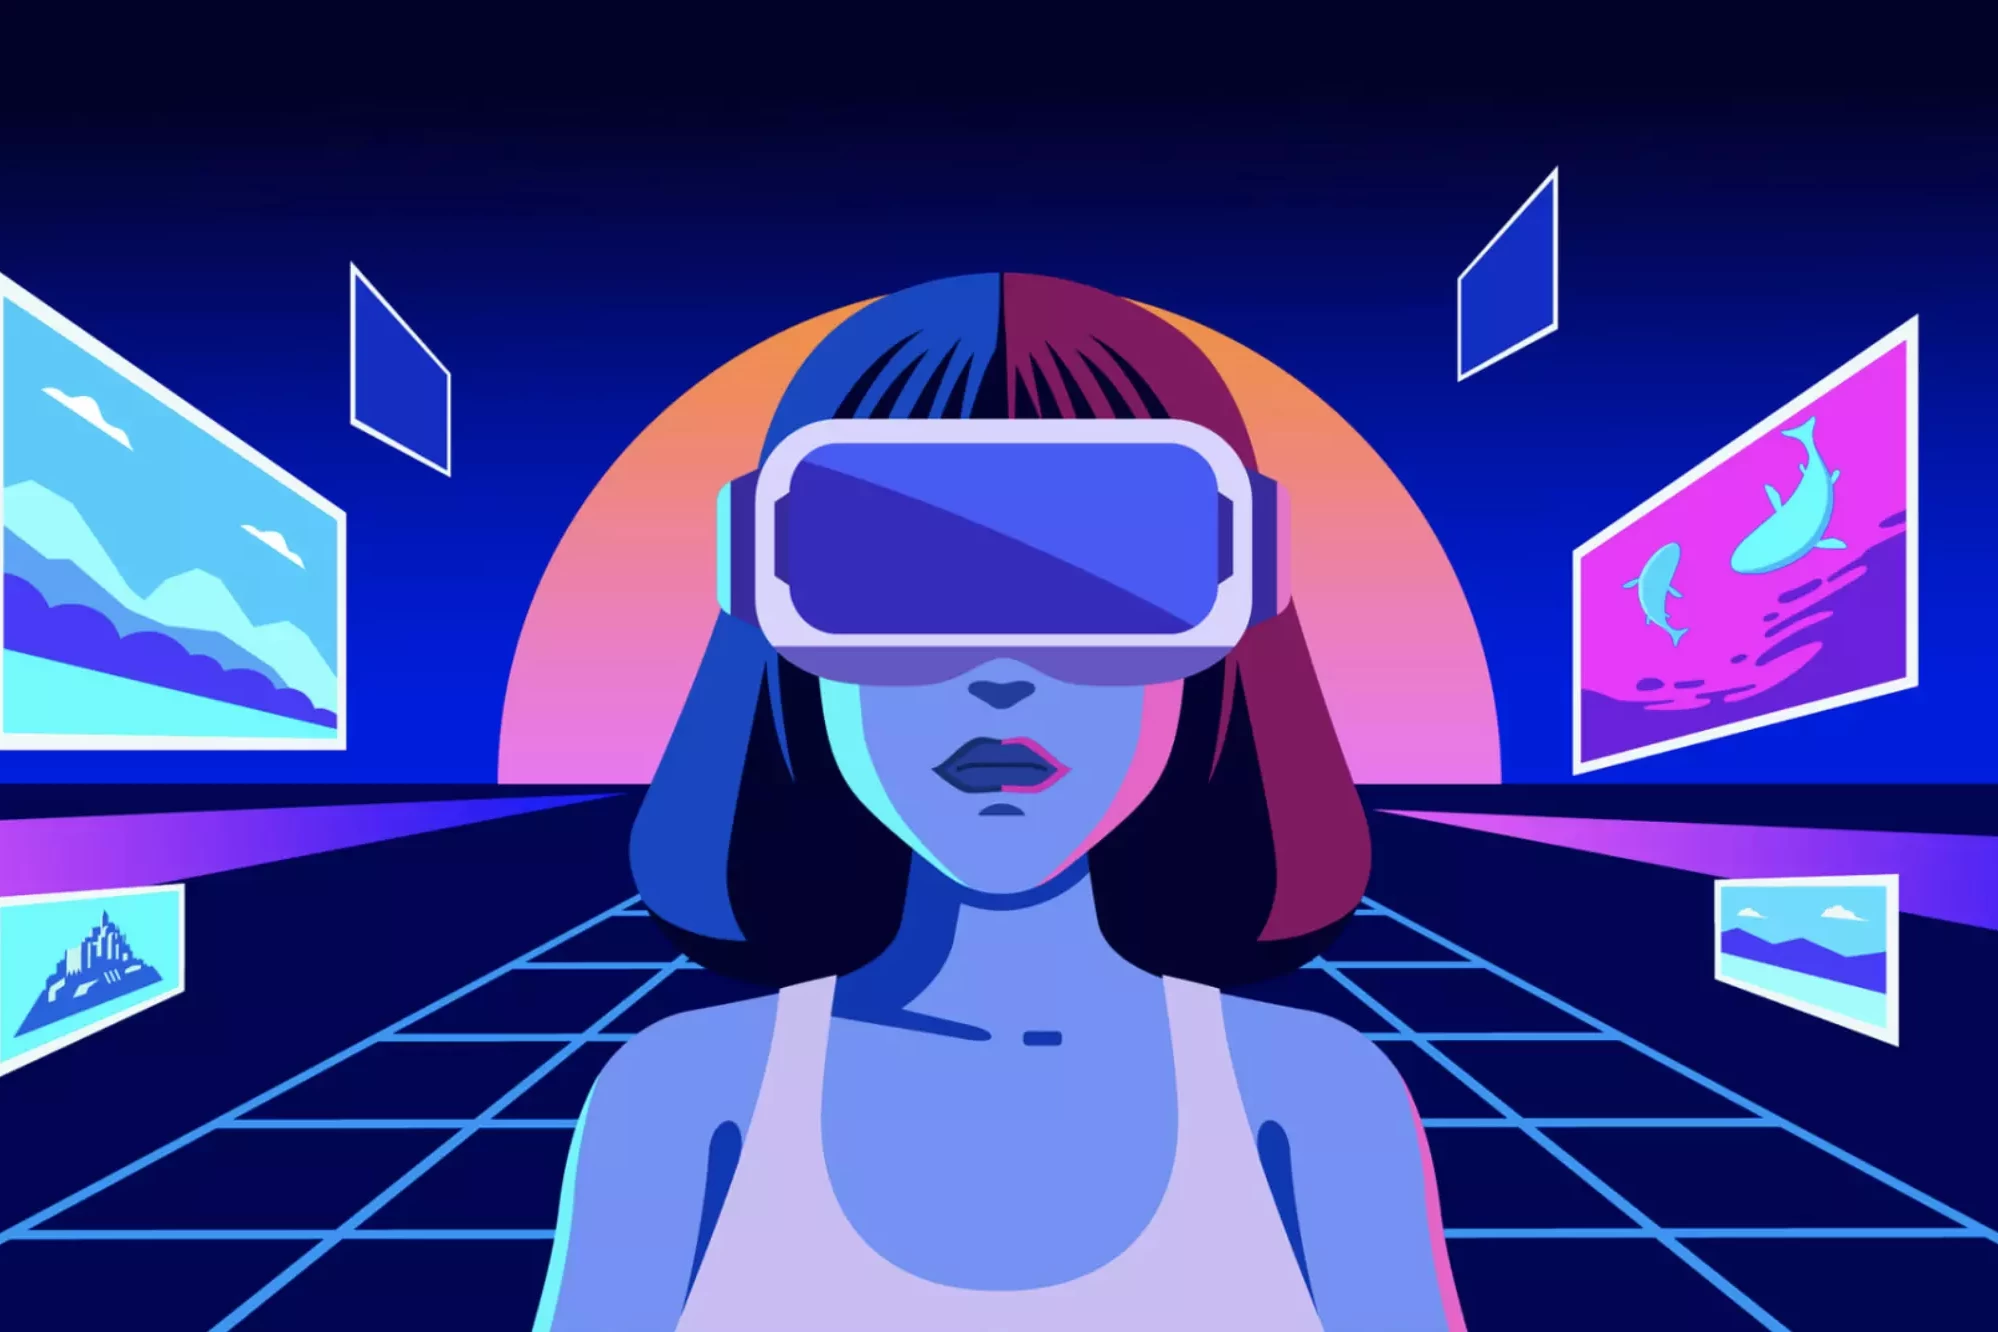 A New Frontier What Does the Metaverse Mean for Marketing